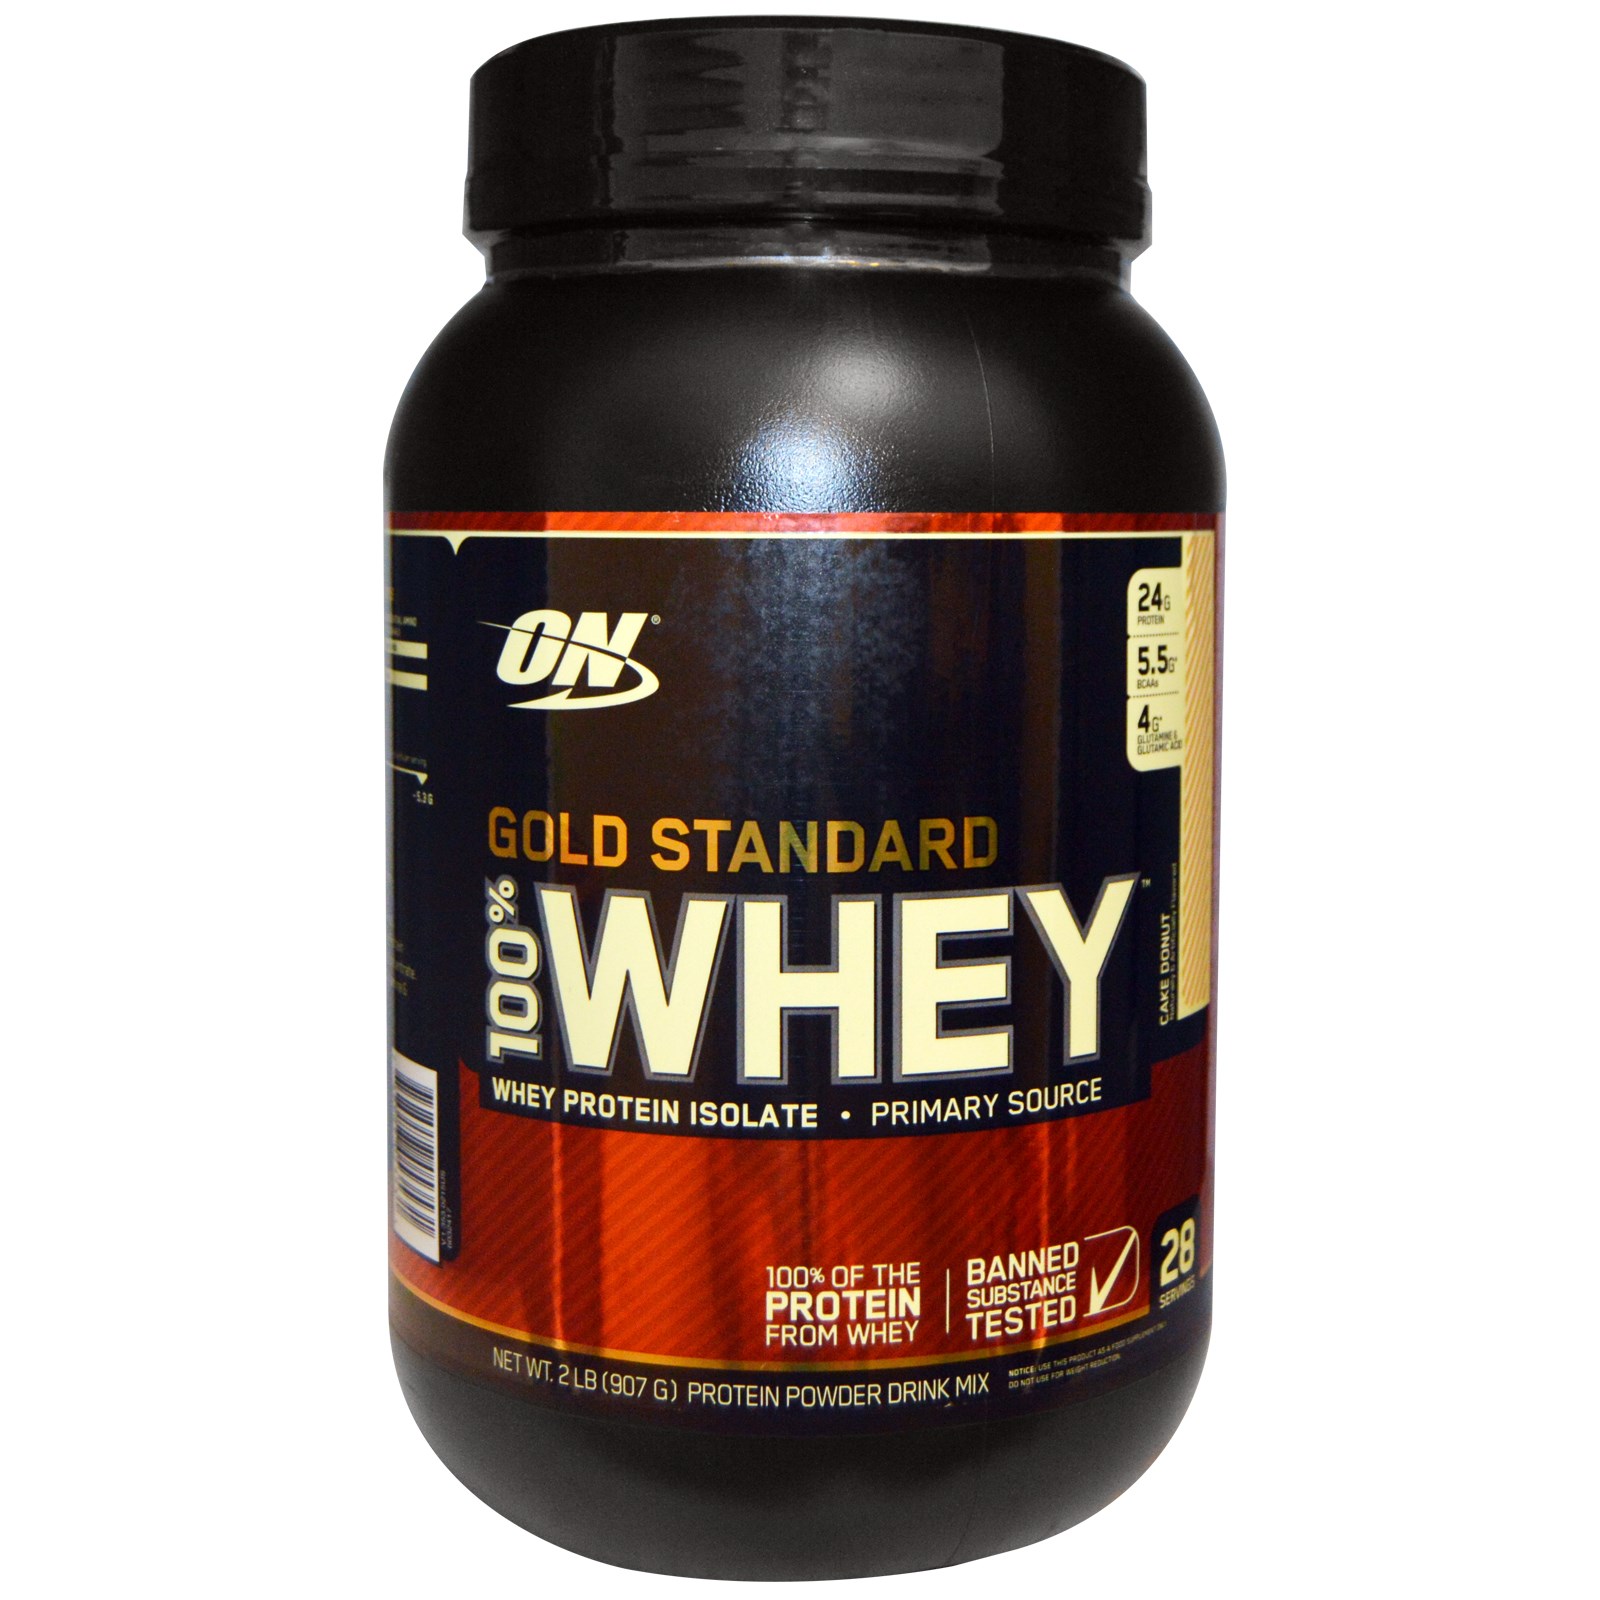 Whey protein isolate Optimum Nutrition Gold Standard